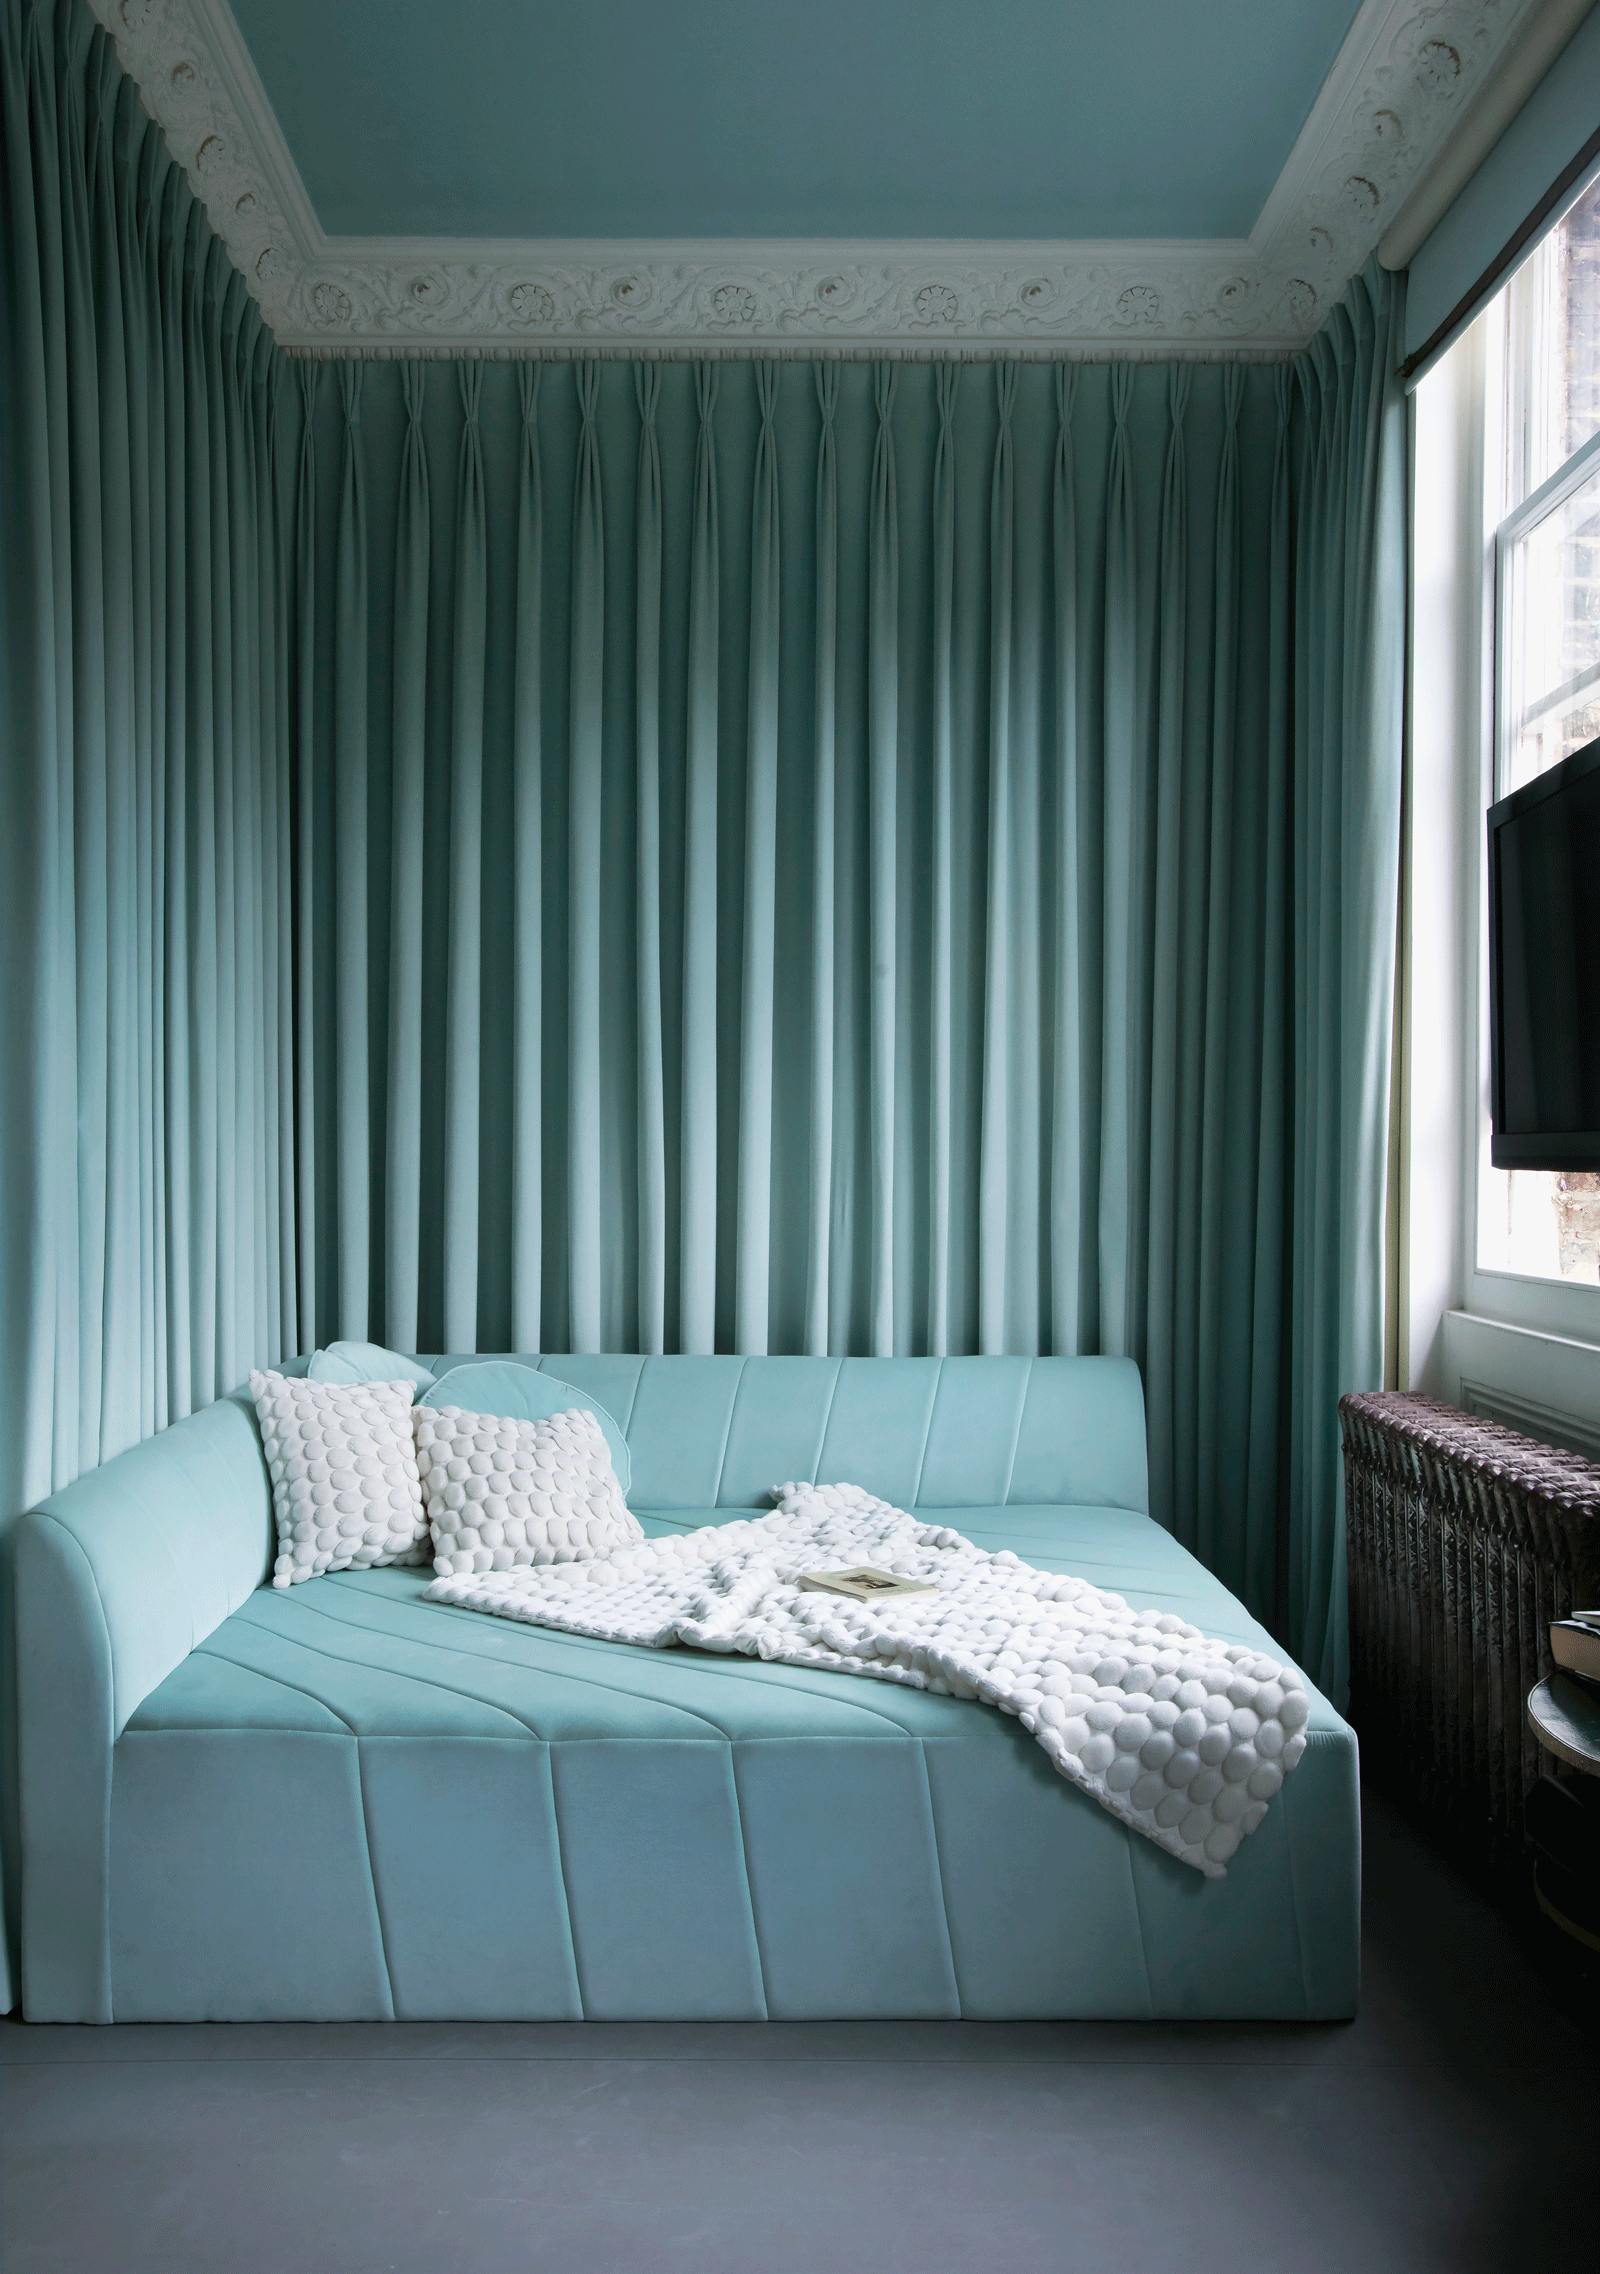 Blue bedroom with curtains hanging from the walls